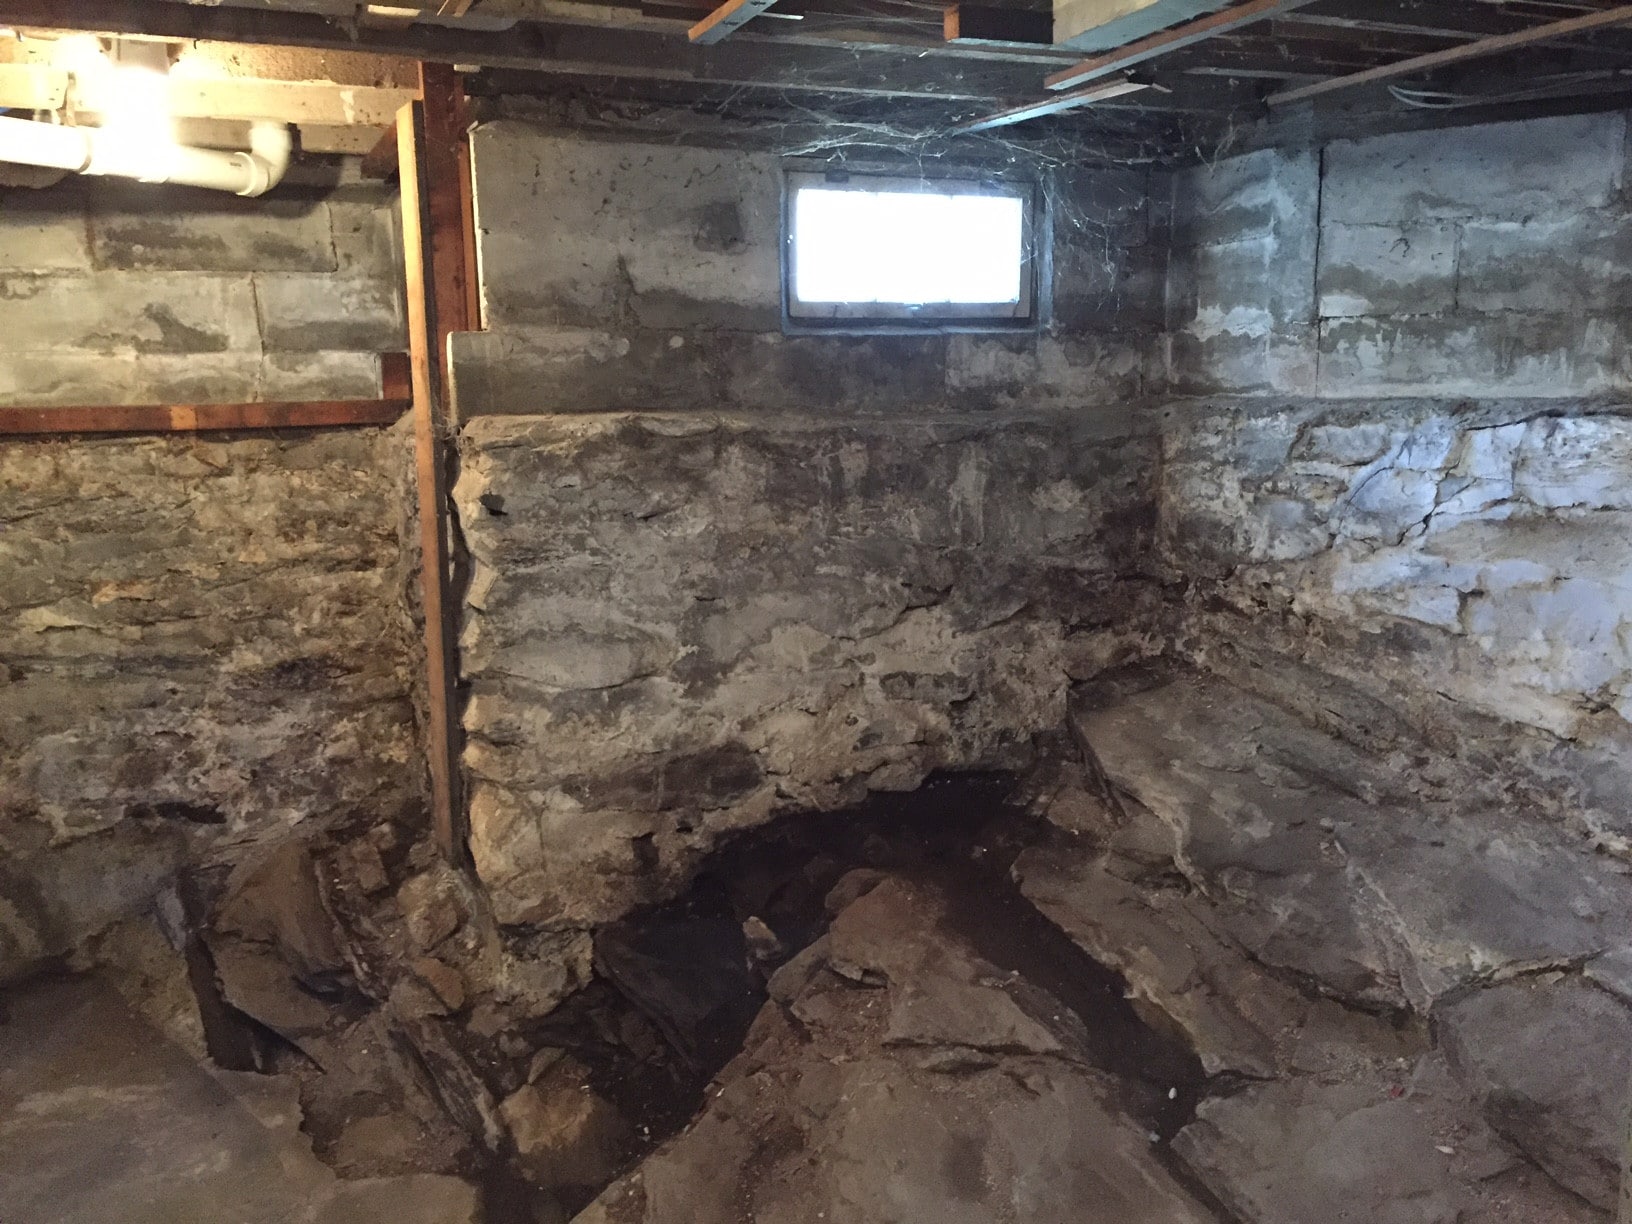 How a High Water Affects Your Basement - Ground Up Foundation Repair